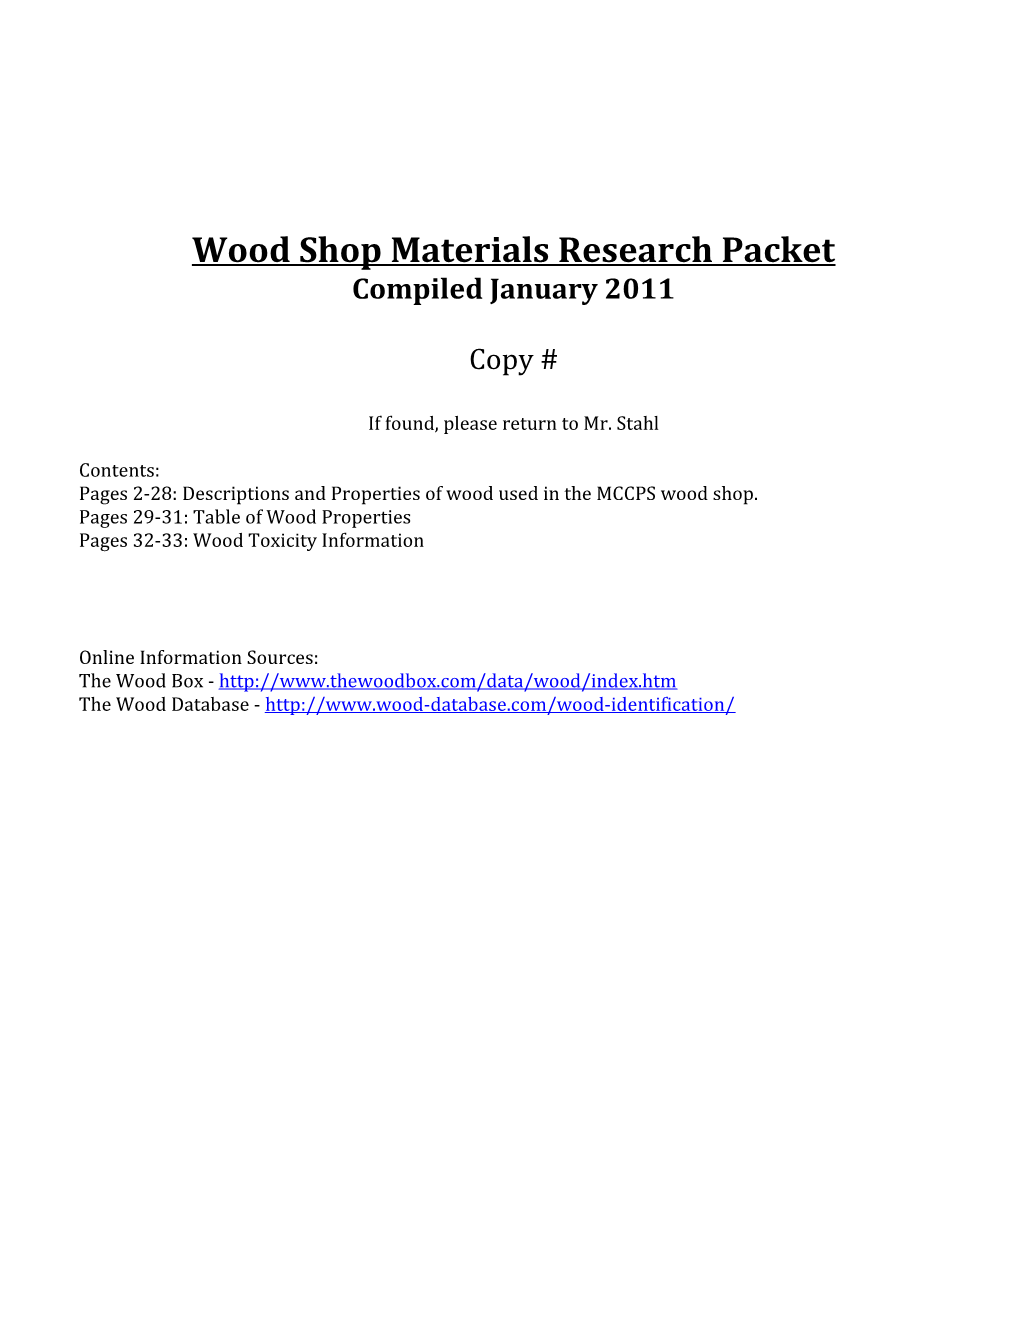 Wood Shop Materials Research Packet